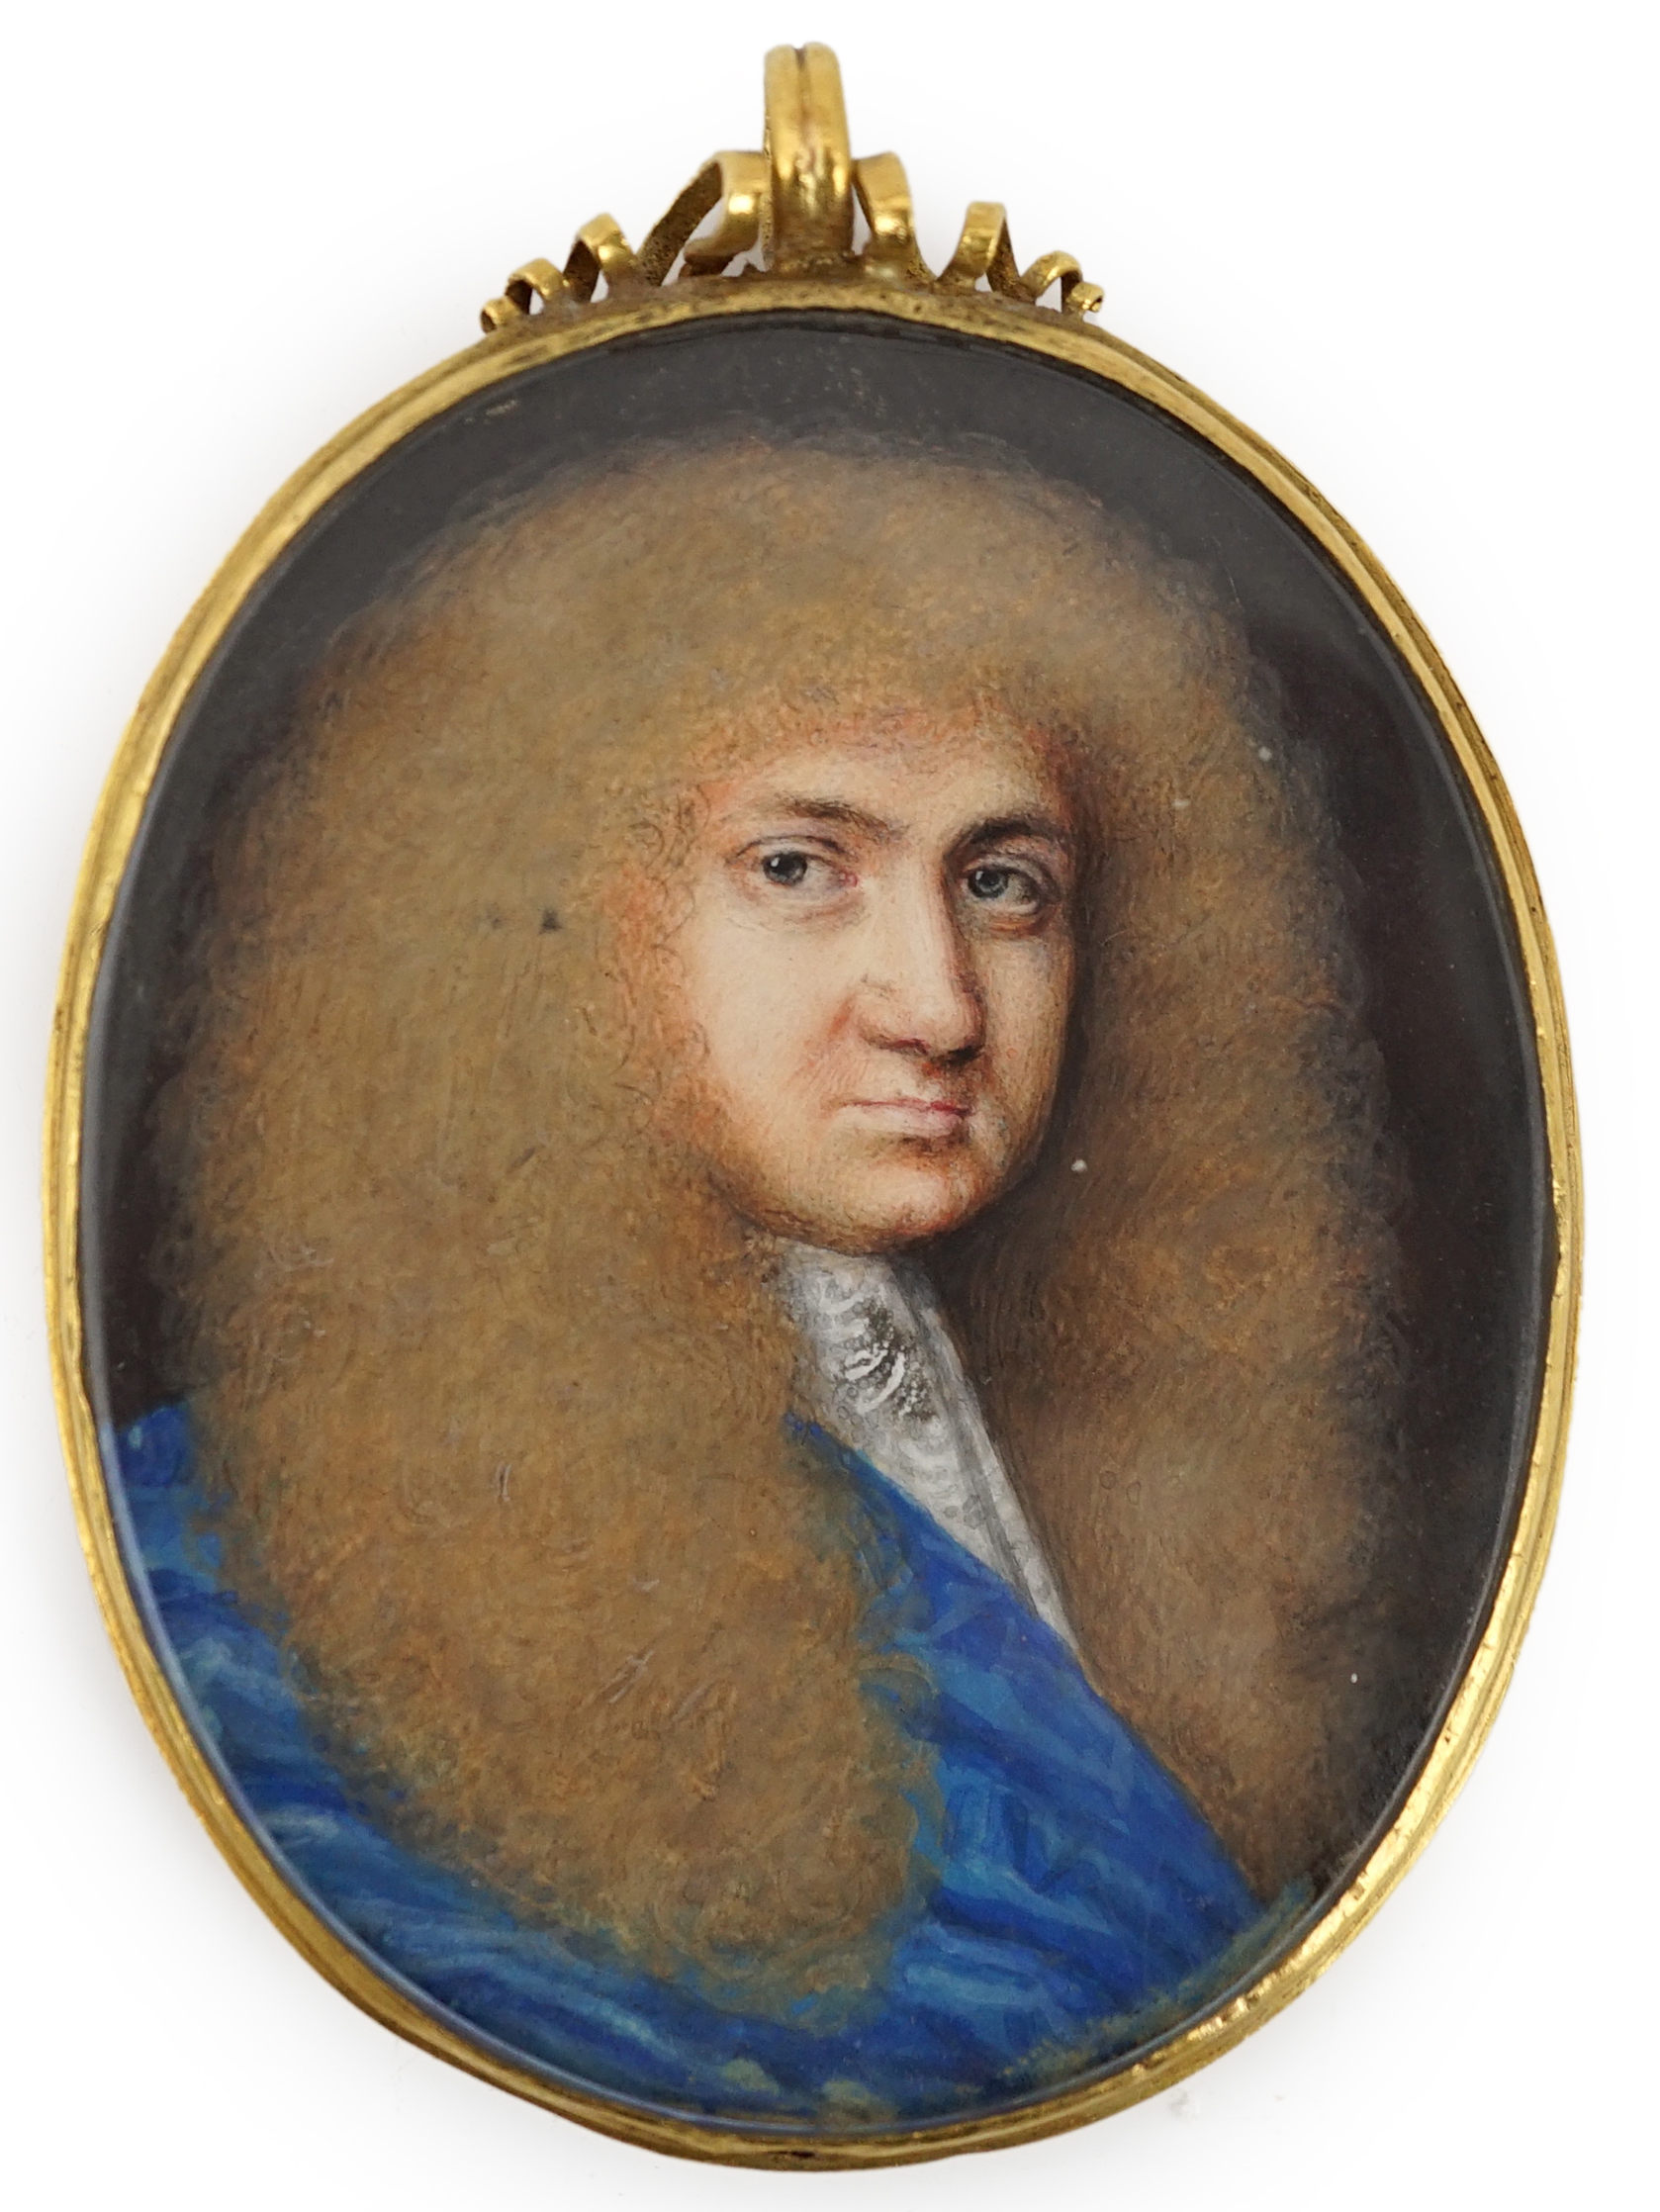 English School circa 1720, Portrait miniature of a gentleman, oil on ivory, 5.3 x 4.1cm. CITES Submission reference VNHAAGRT